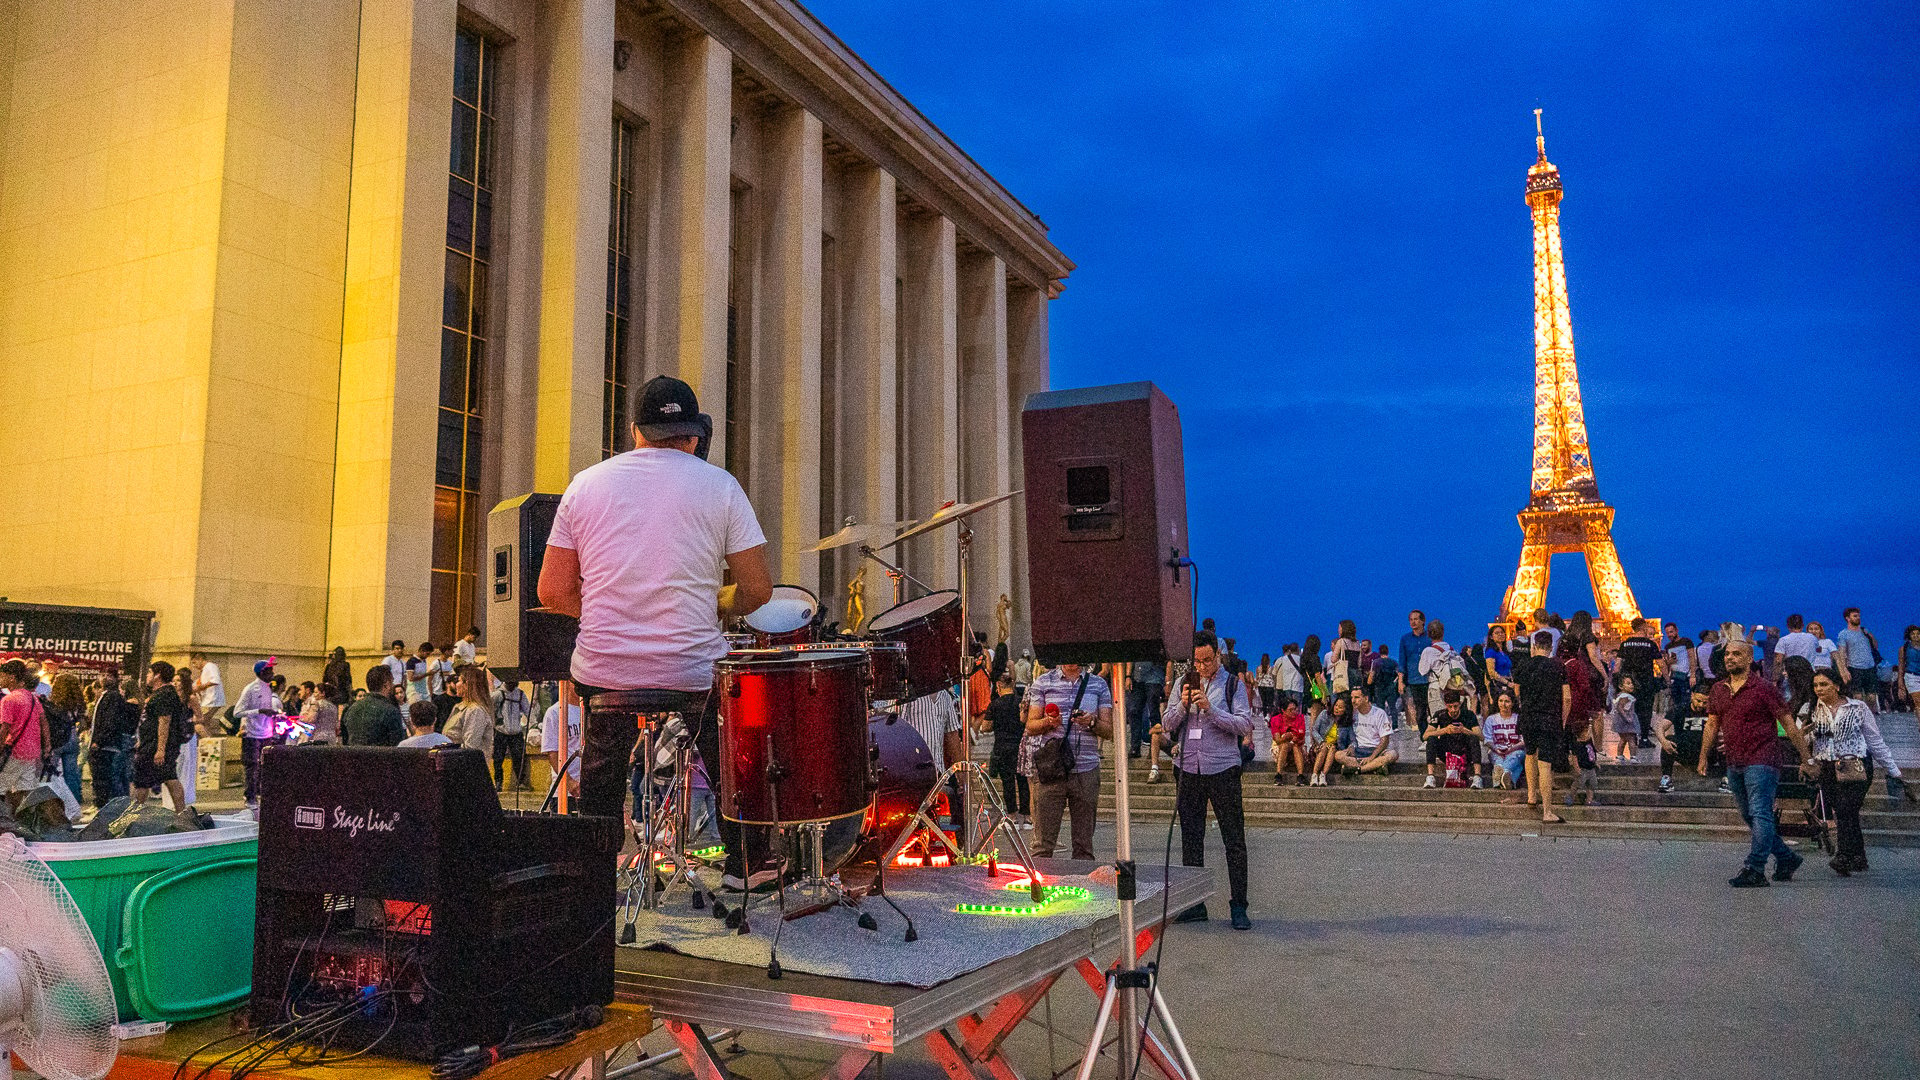 This image shows a band playing music with several people watching. The illuminated Eiffel Tower is in the background. 